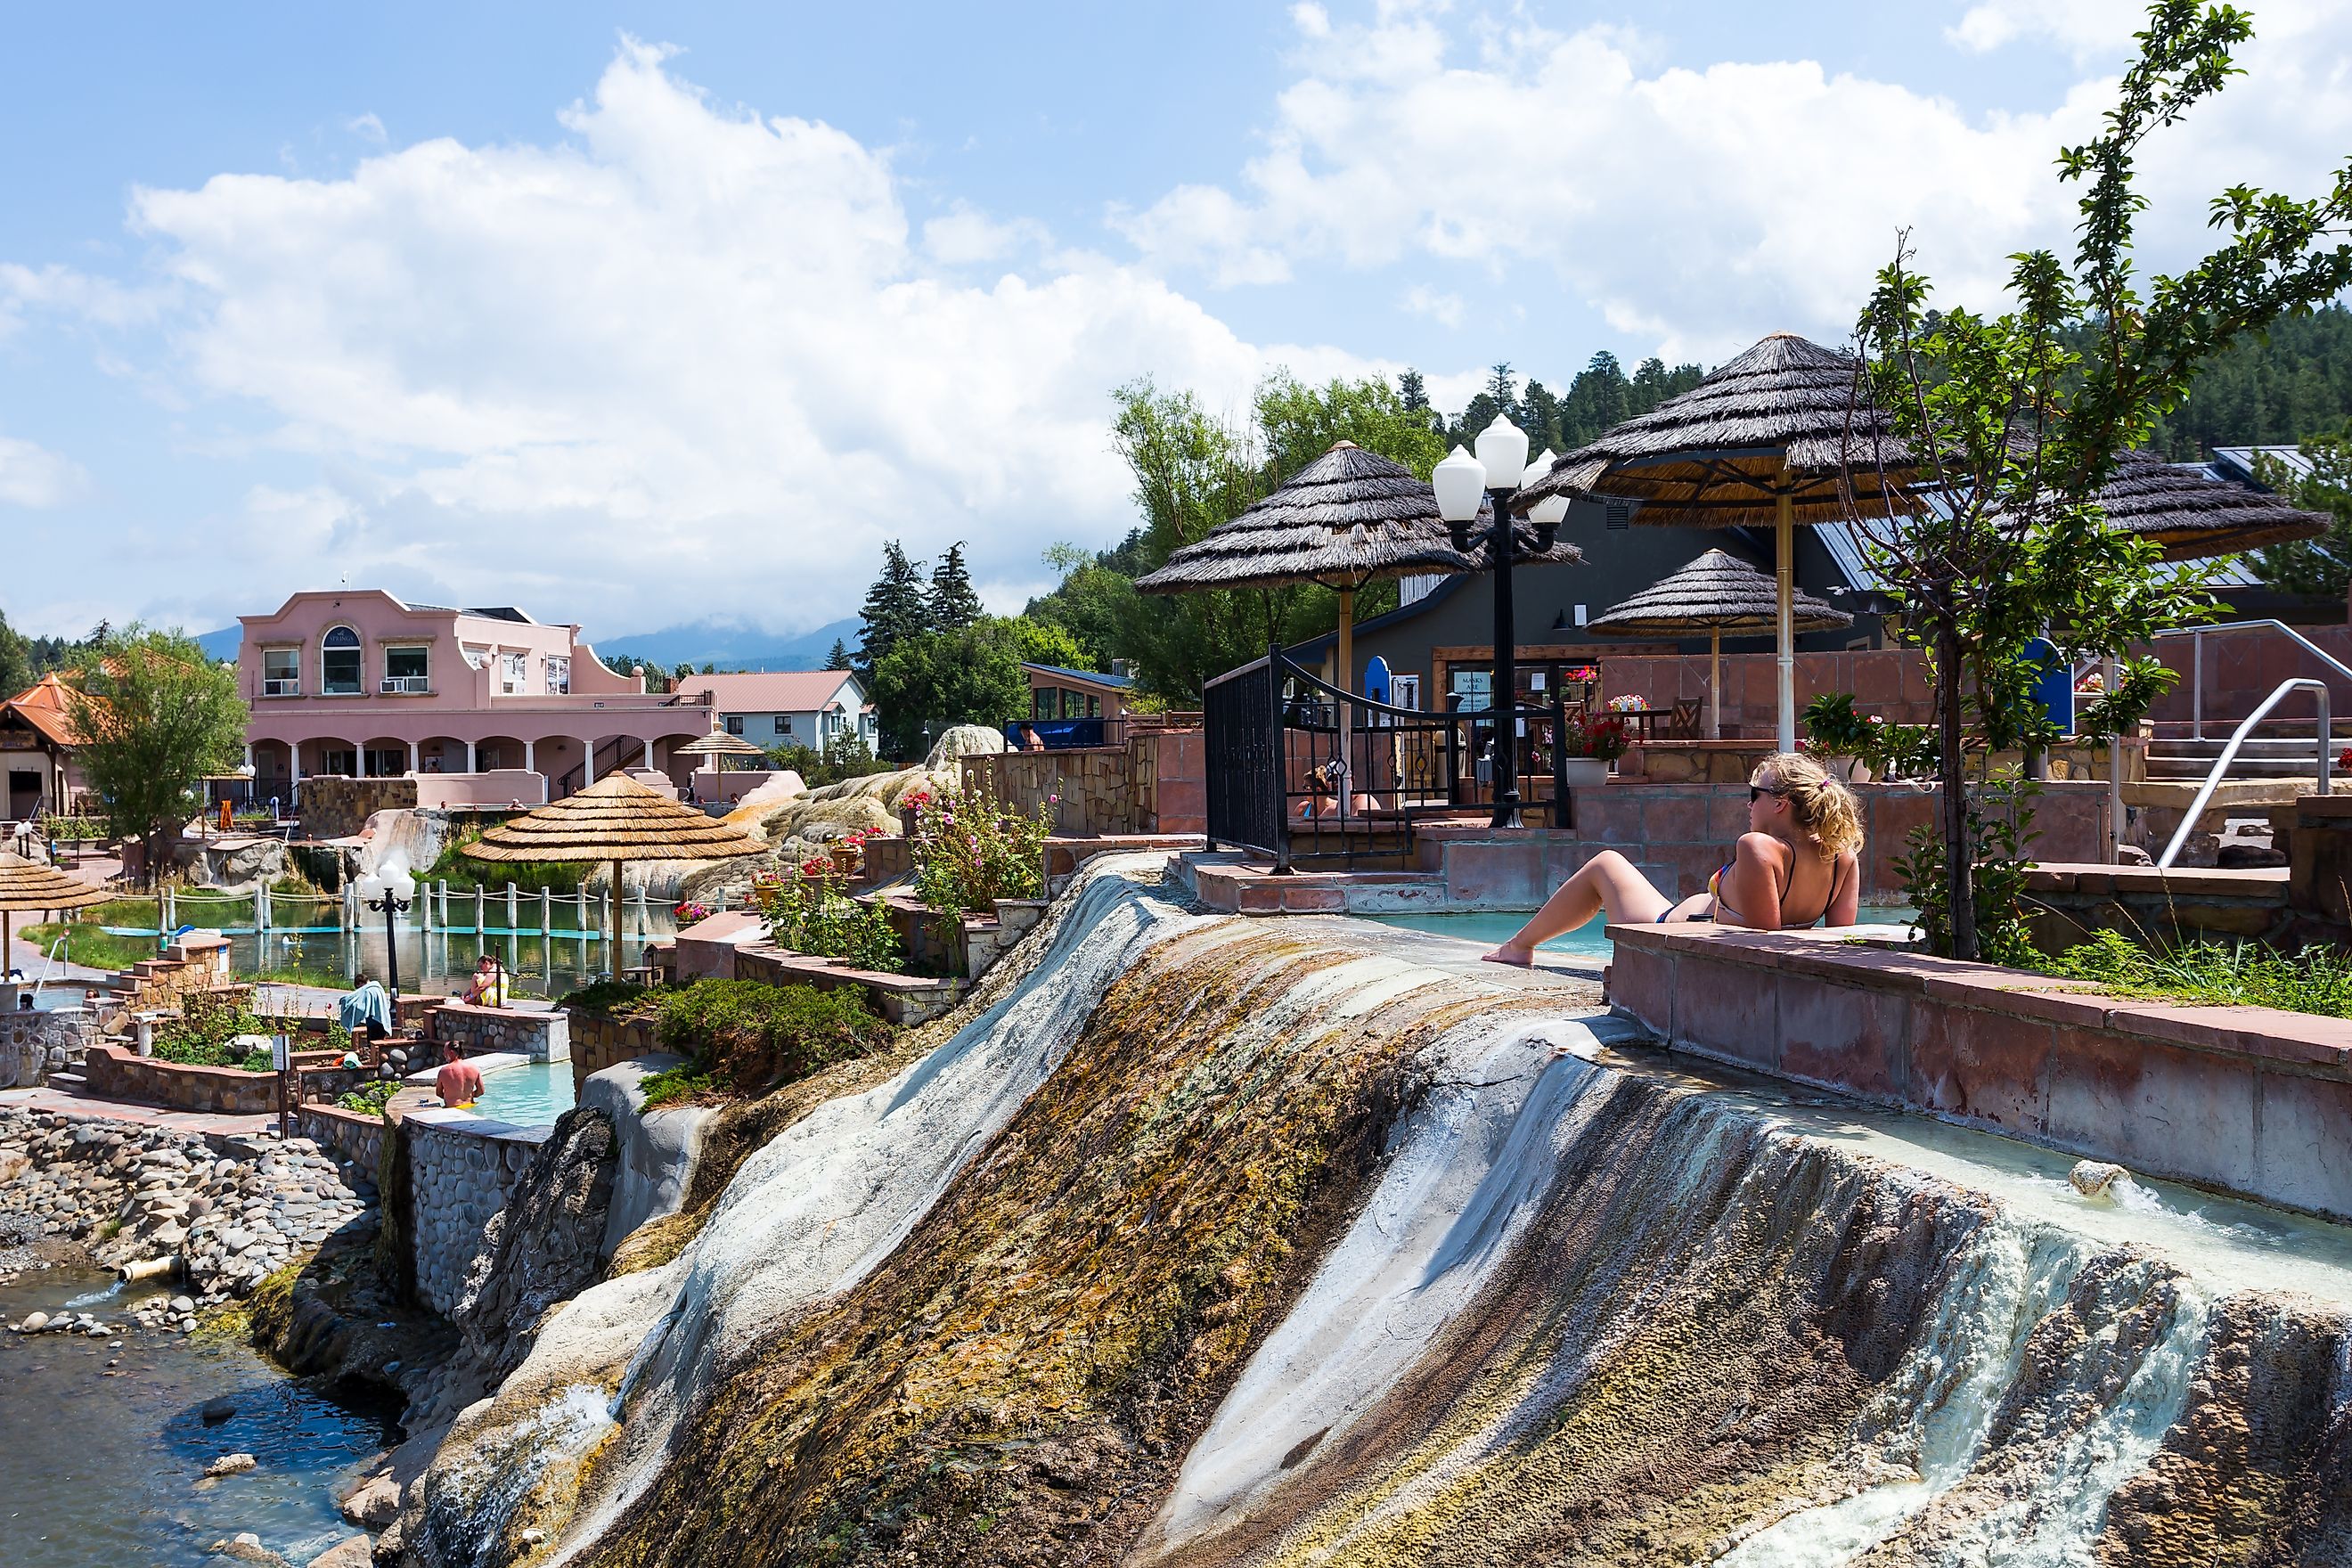 People chilling out in the Springs Resort & Spa in Pagosa Springs, Colorado. Editorial credit: Victoria Ditkovsky / Shutterstock.com